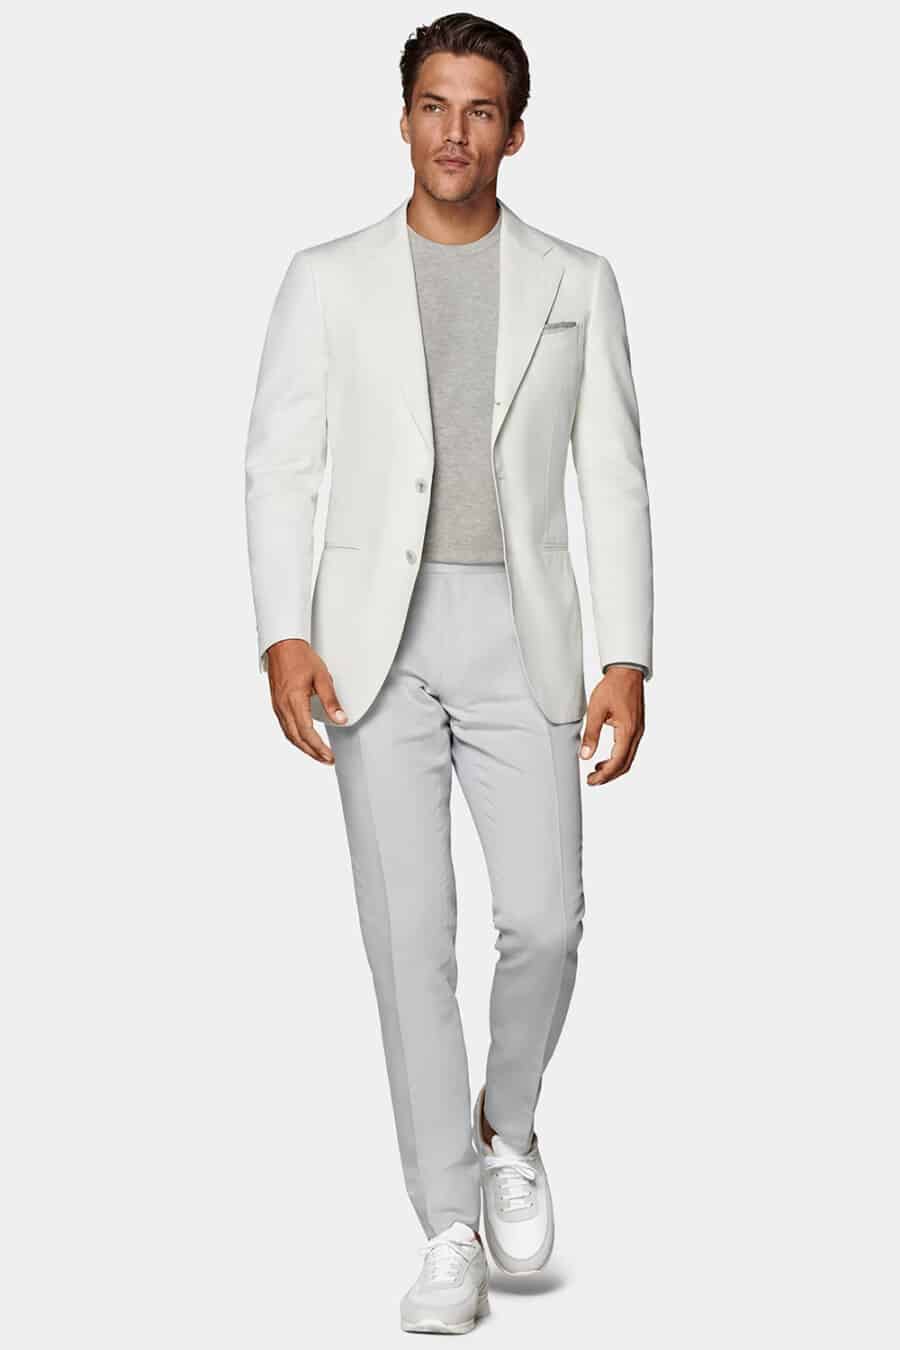 Men's grey pants, light grey T-shirt, white blazer and white sneakers outfit